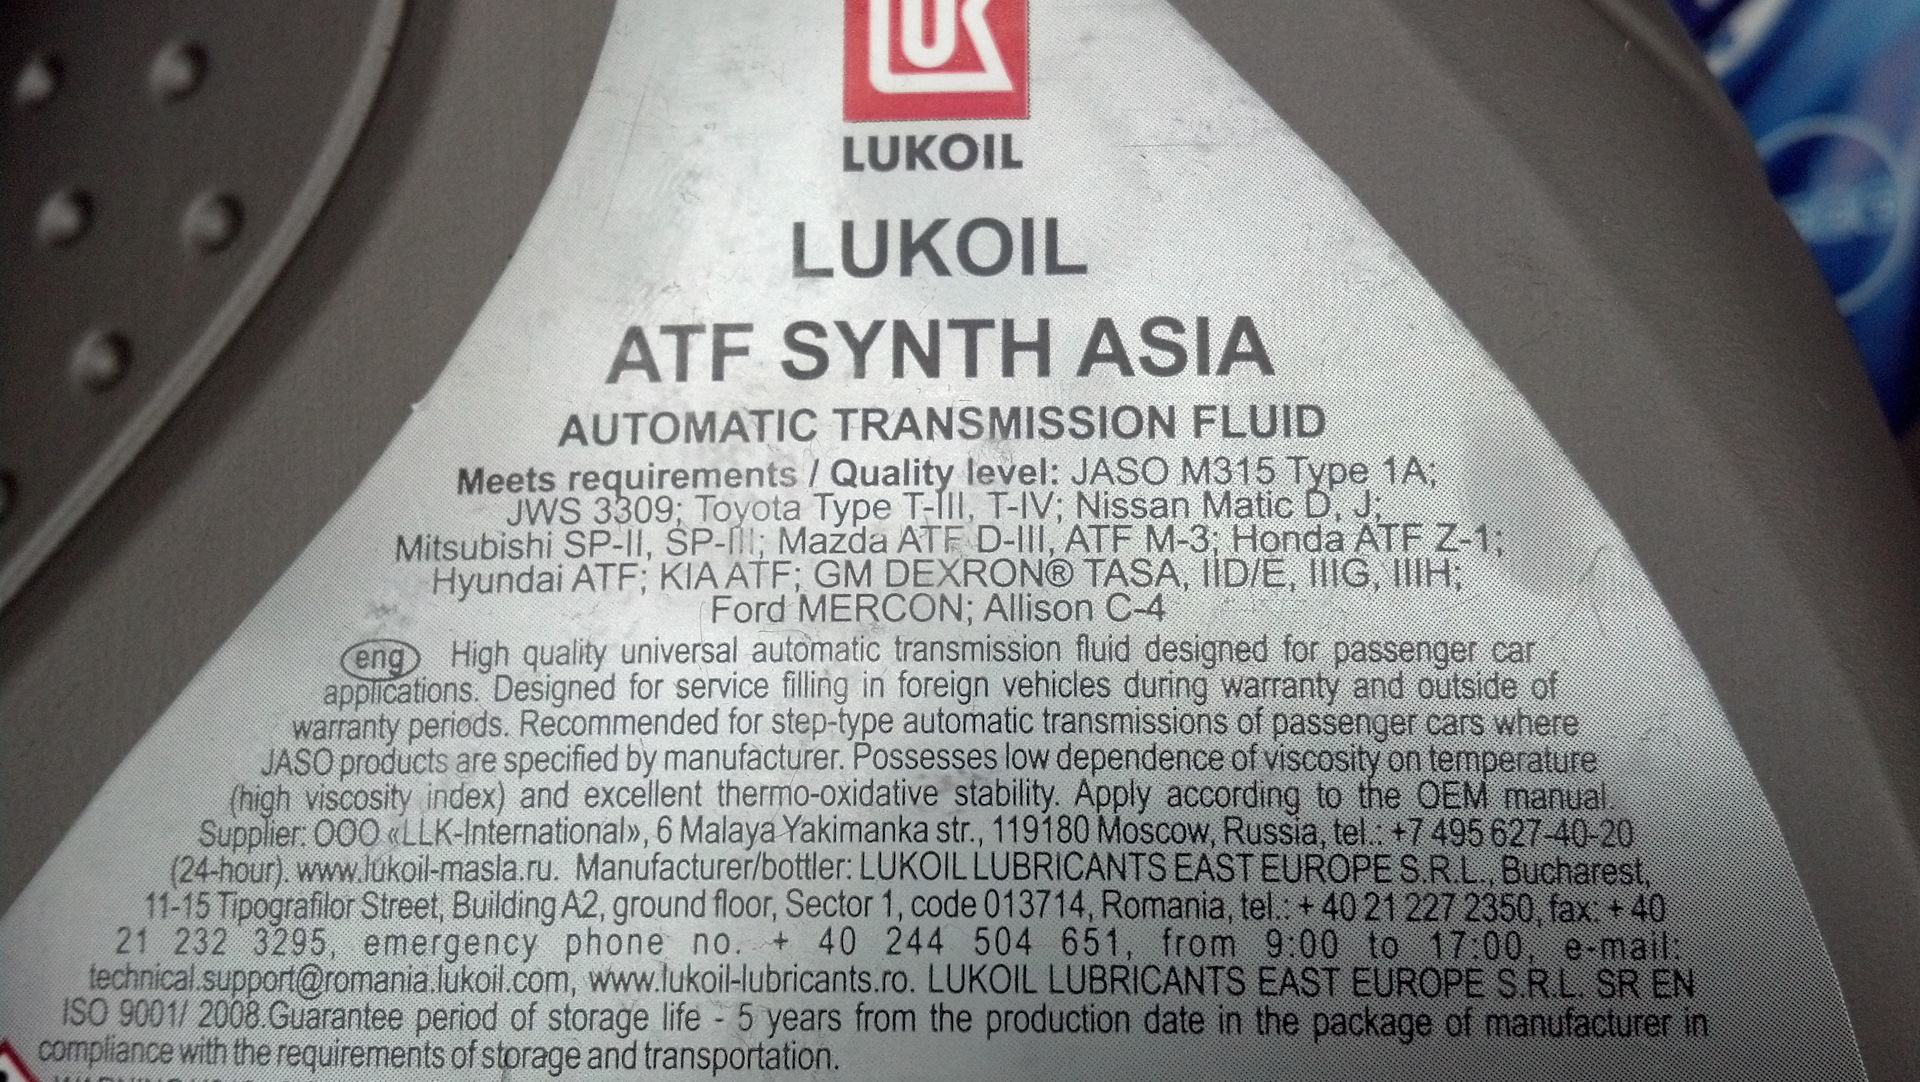 Лукойл atf multi. Lukoil ATF Synth 15. Lukoil ATF Synth m 15. Лукойл ATF Synth m 14. Лукойл ATF Synth Asia.